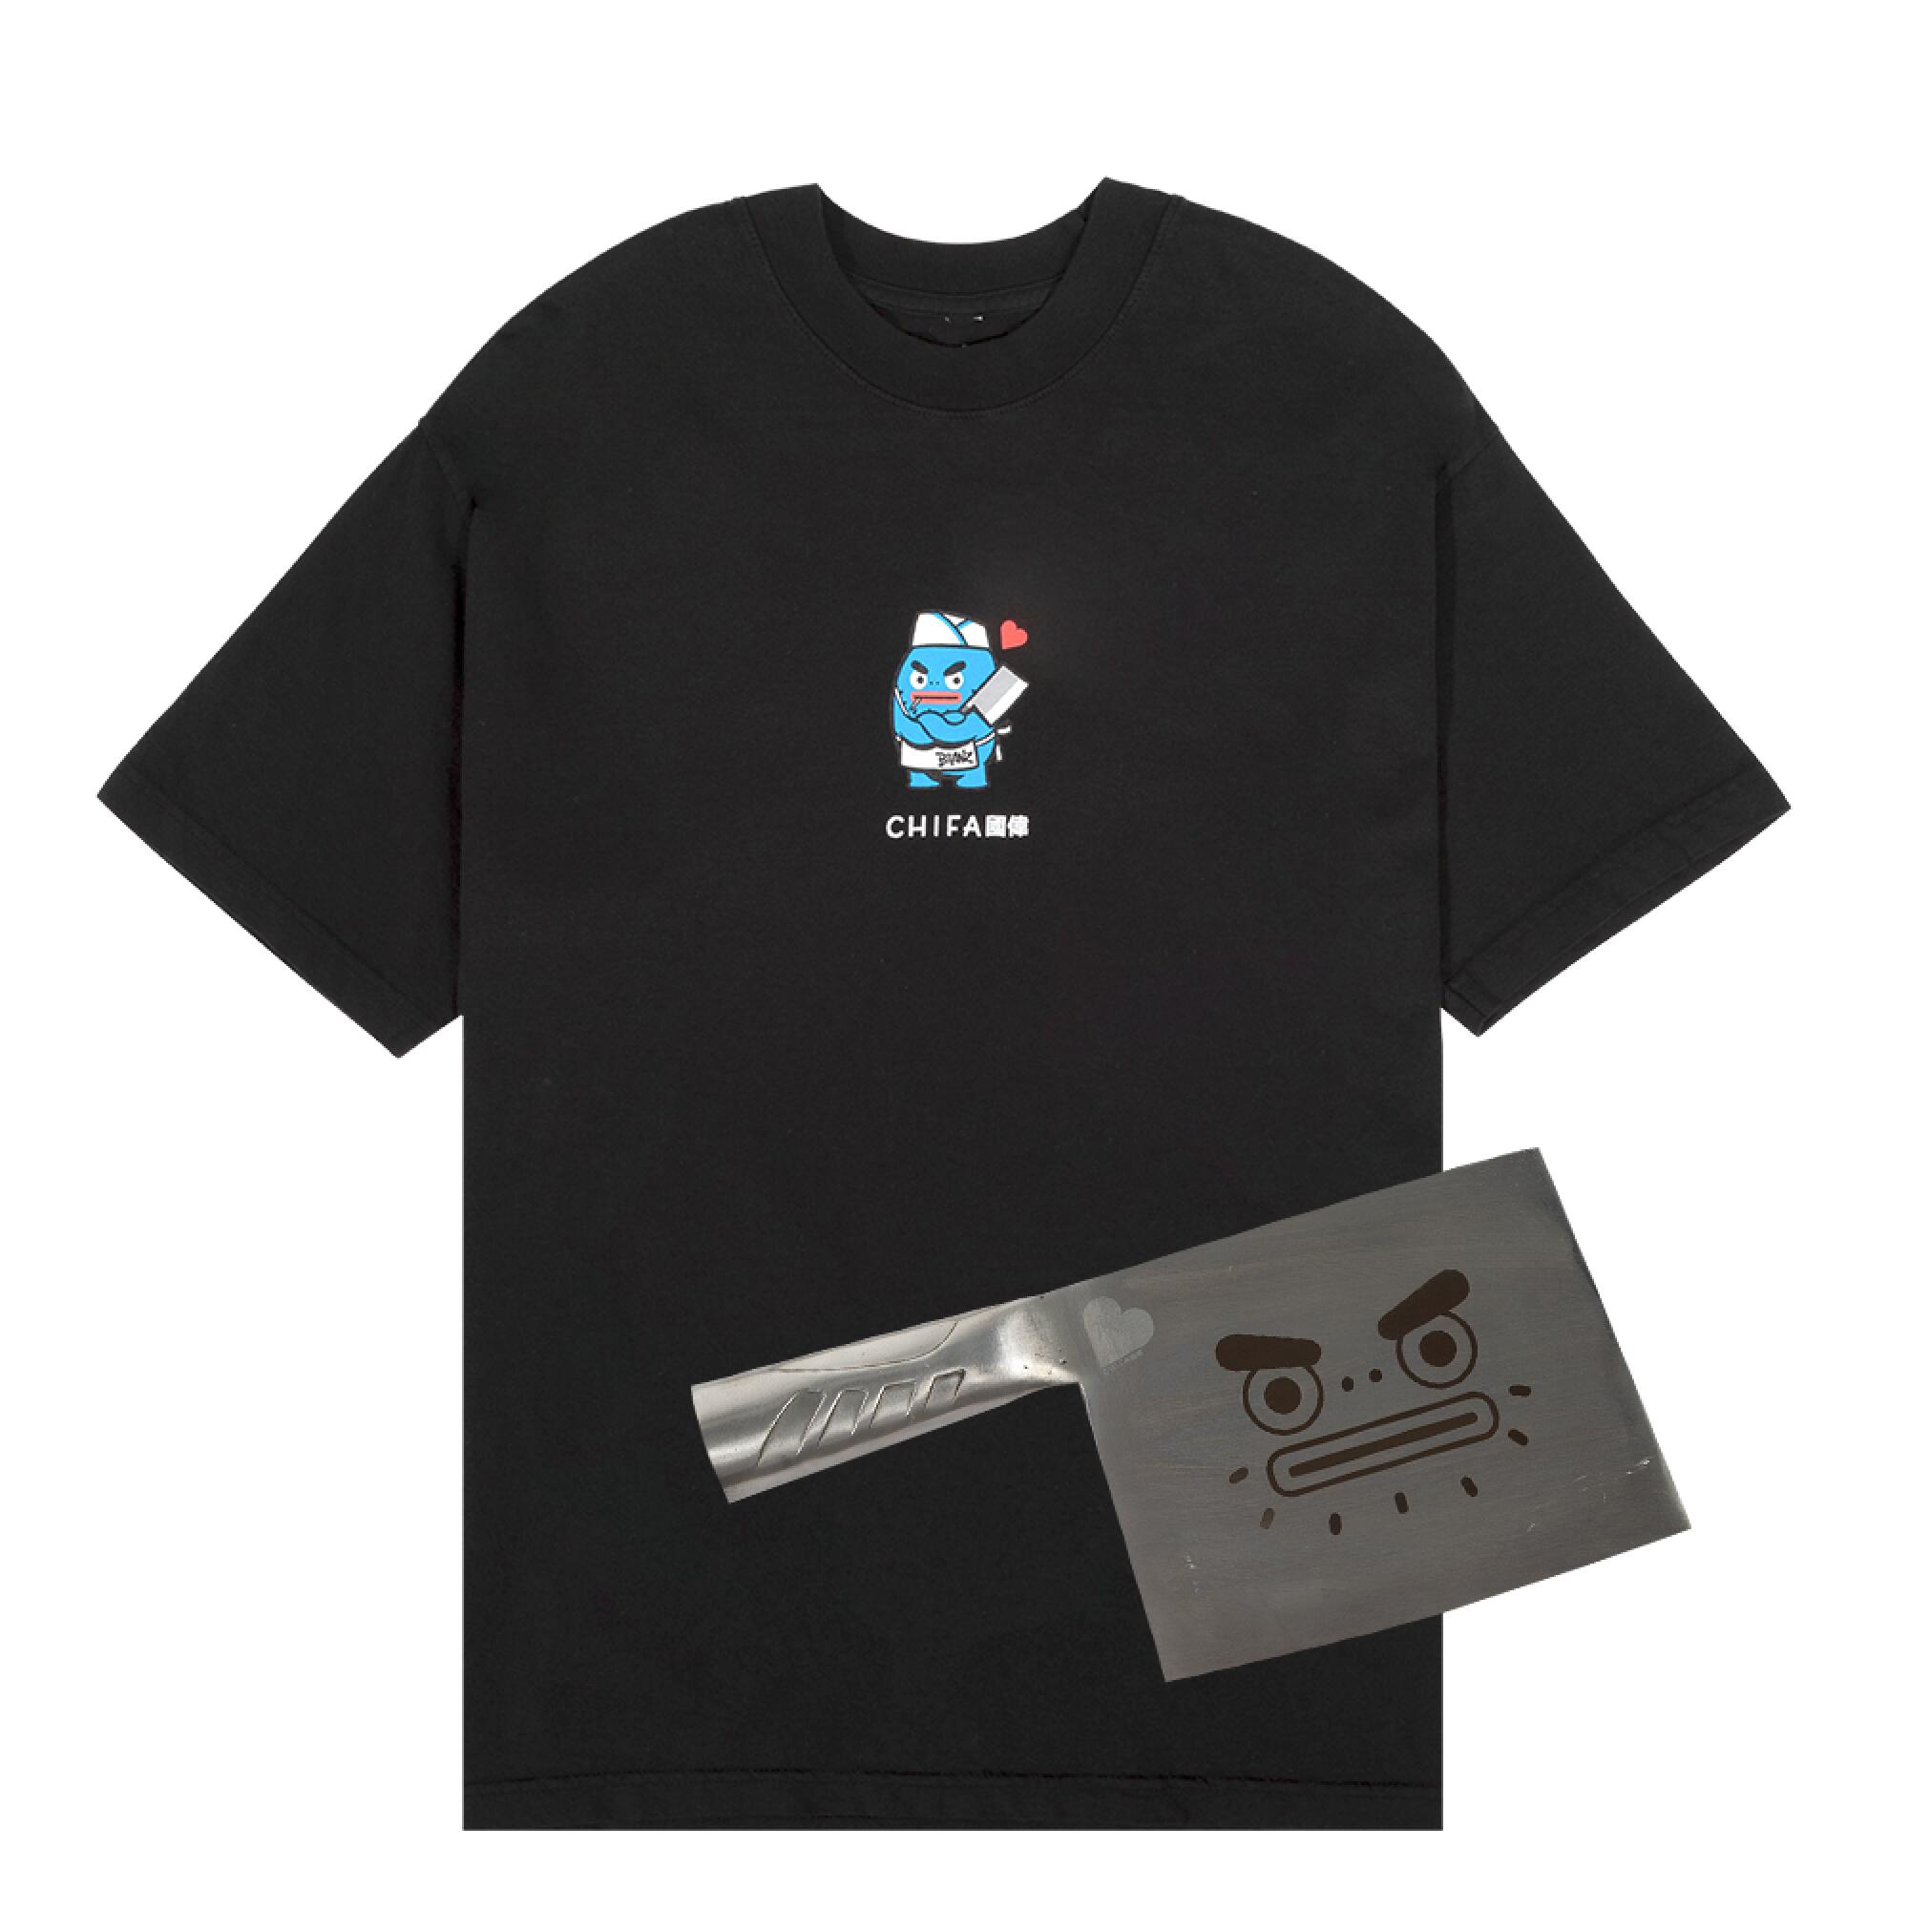 Chifa and Azuki collaboration features a black T-shirt and a cleaver